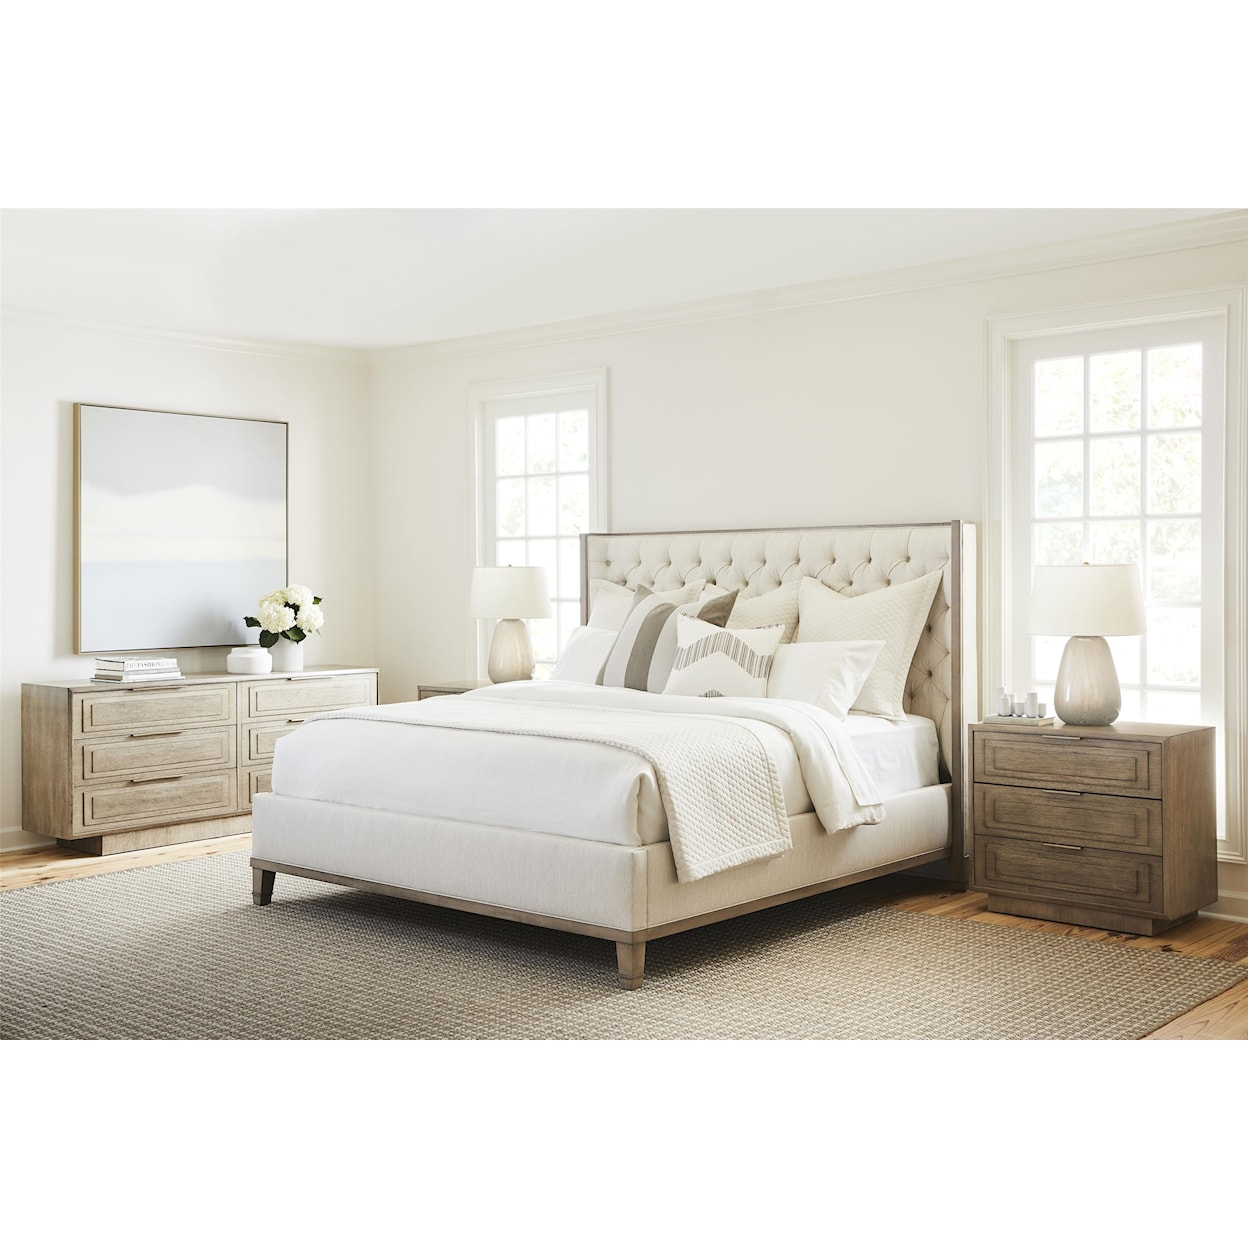 Vanguard Furniture Michael Weiss Bowers King Bed